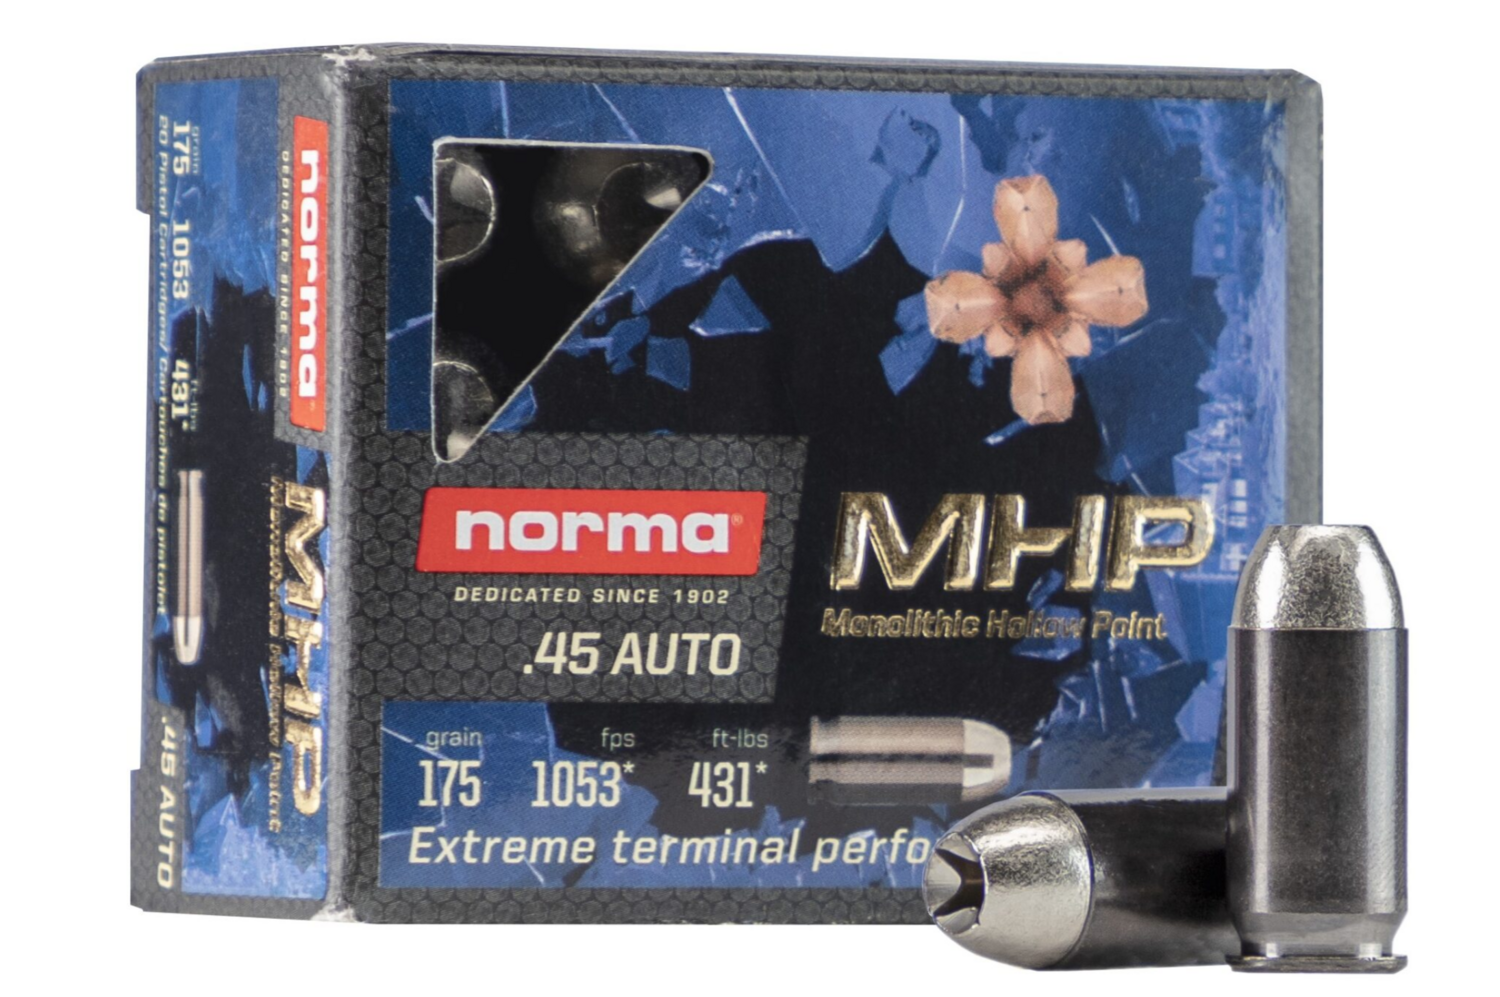 Norma Monolithic Hollow Point .45 Auto 175gr Hollow Point Brass Cased Centerfire Pistol Ammunition 245720020 Caliber: .45 Auto, Number of Rounds: 20